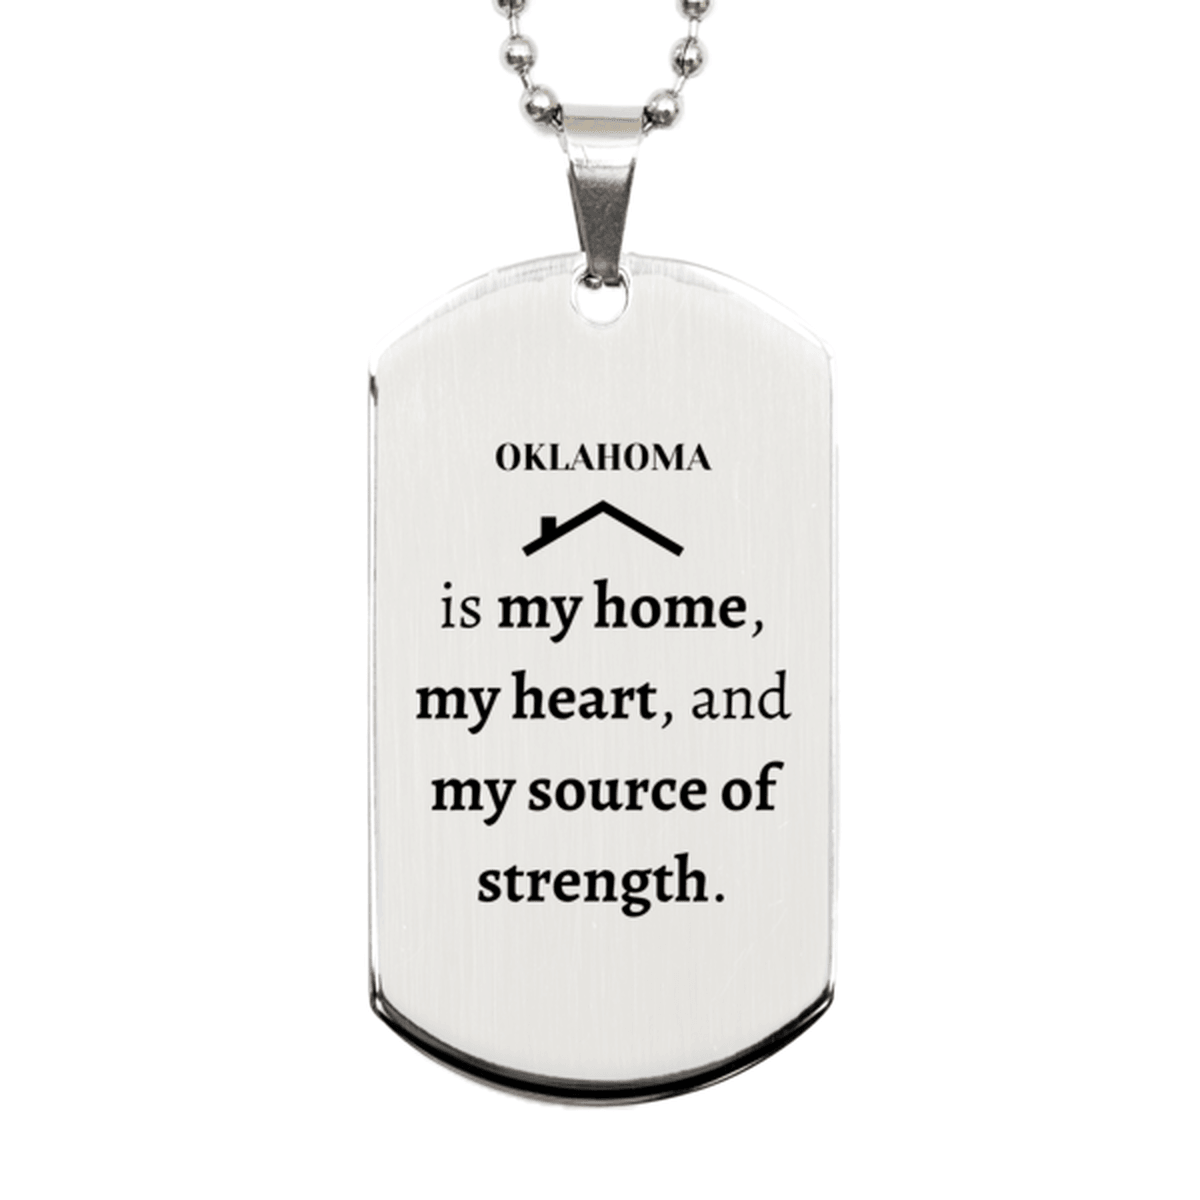 Oklahoma is my home Gifts, Lovely Oklahoma Birthday Christmas Silver Dog Tag For People from Oklahoma, Men, Women, Friends - Mallard Moon Gift Shop